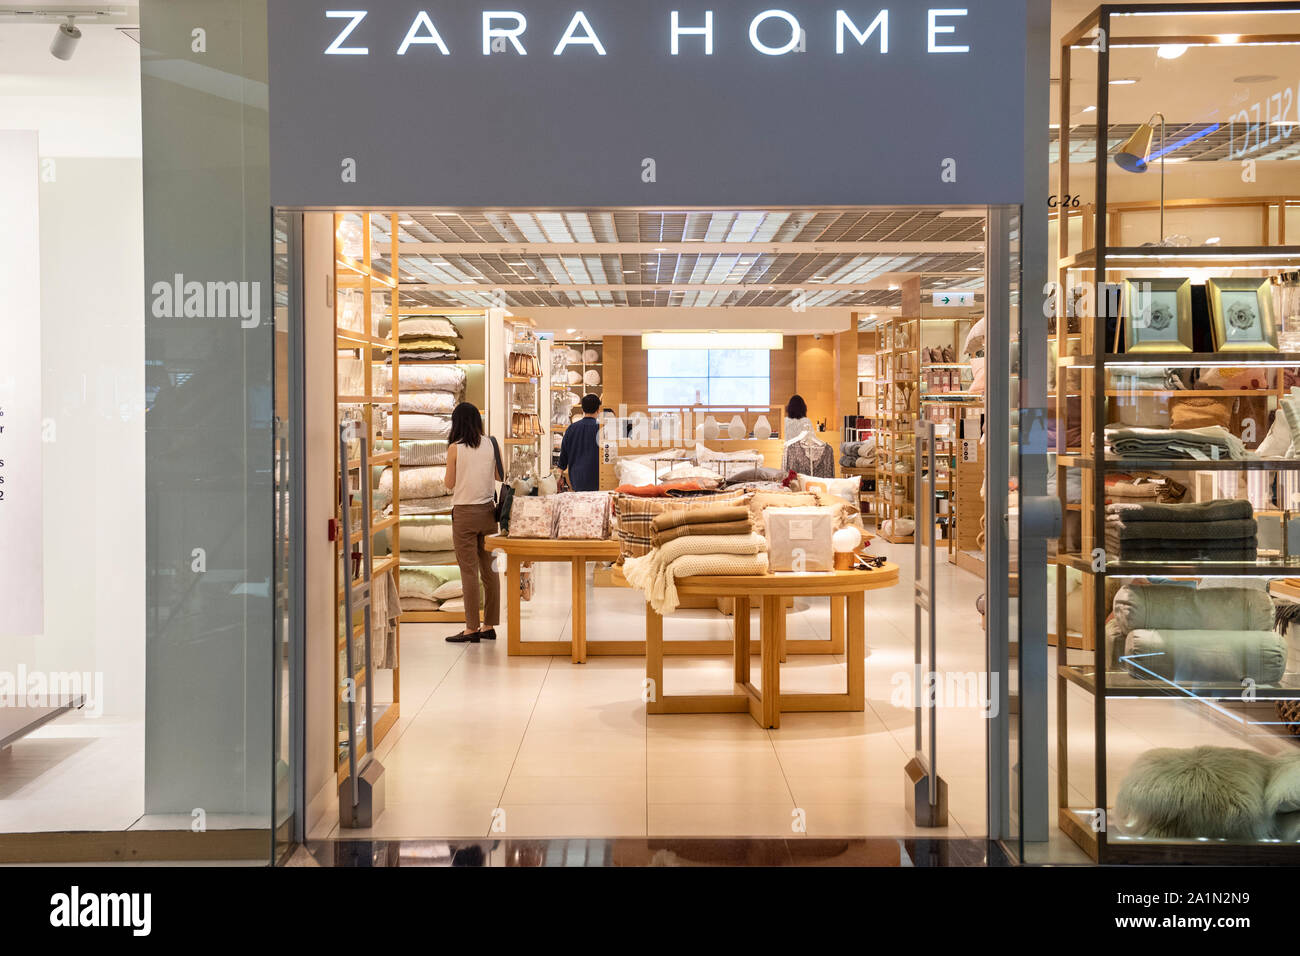 Inditex Brand High Resolution Stock Photography and Images - Alamy